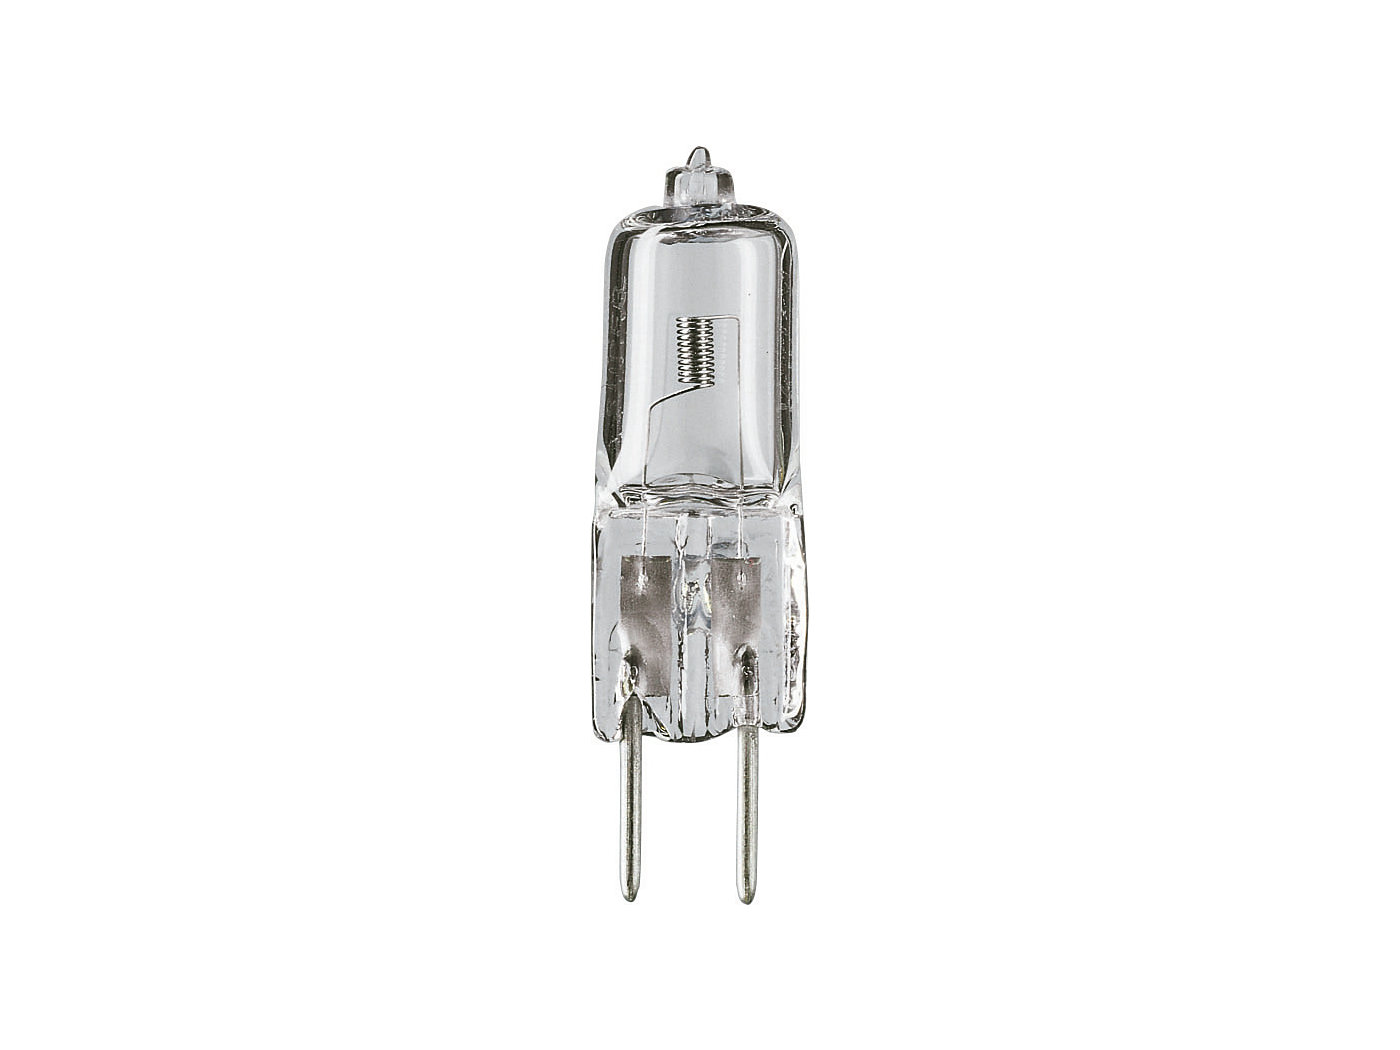 Ess Capsule 50W GY6.35
12V CL 1CT/50